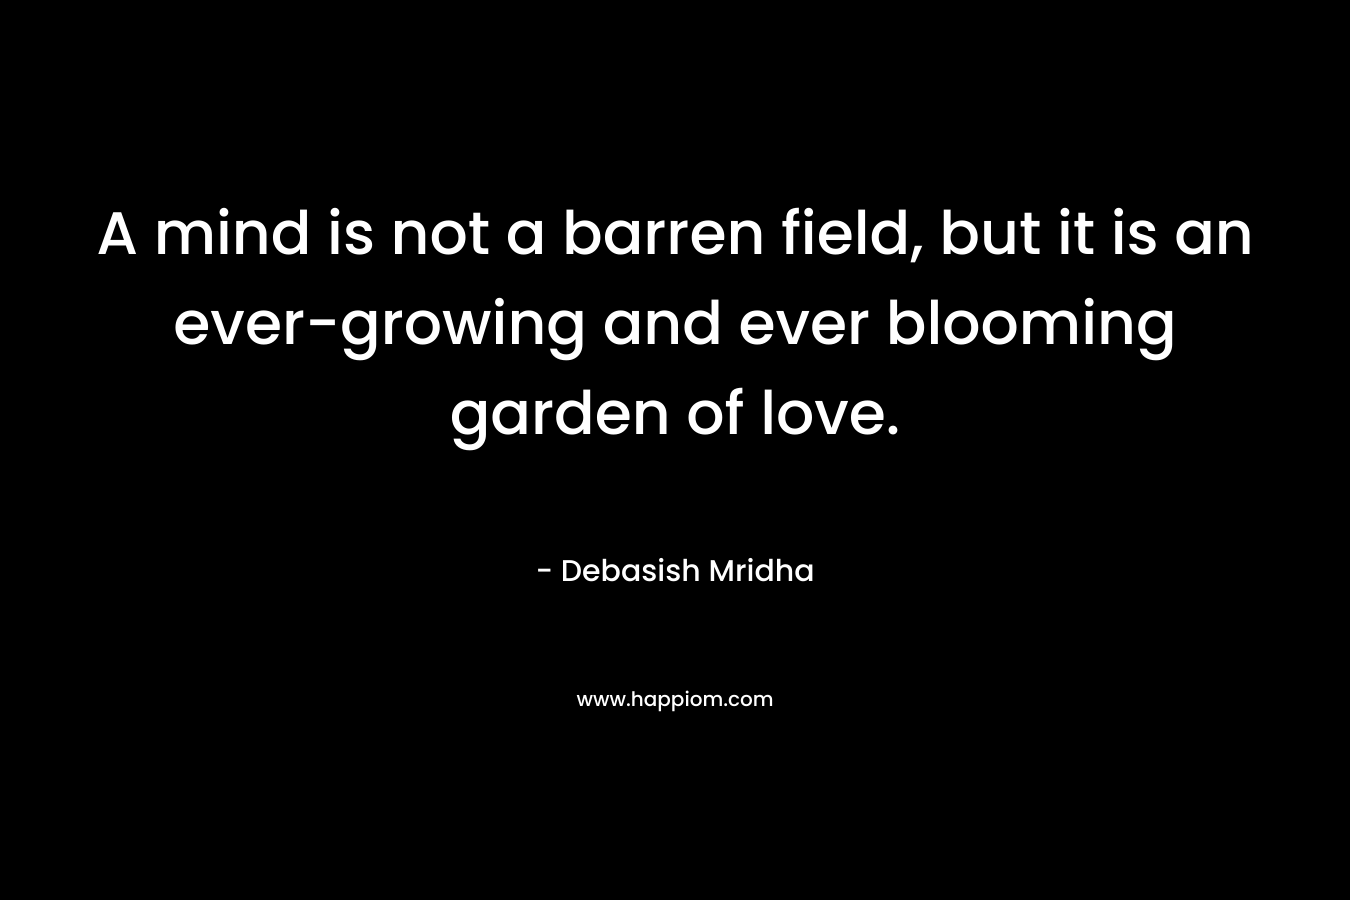 A mind is not a barren field, but it is an ever-growing and ever blooming garden of love.